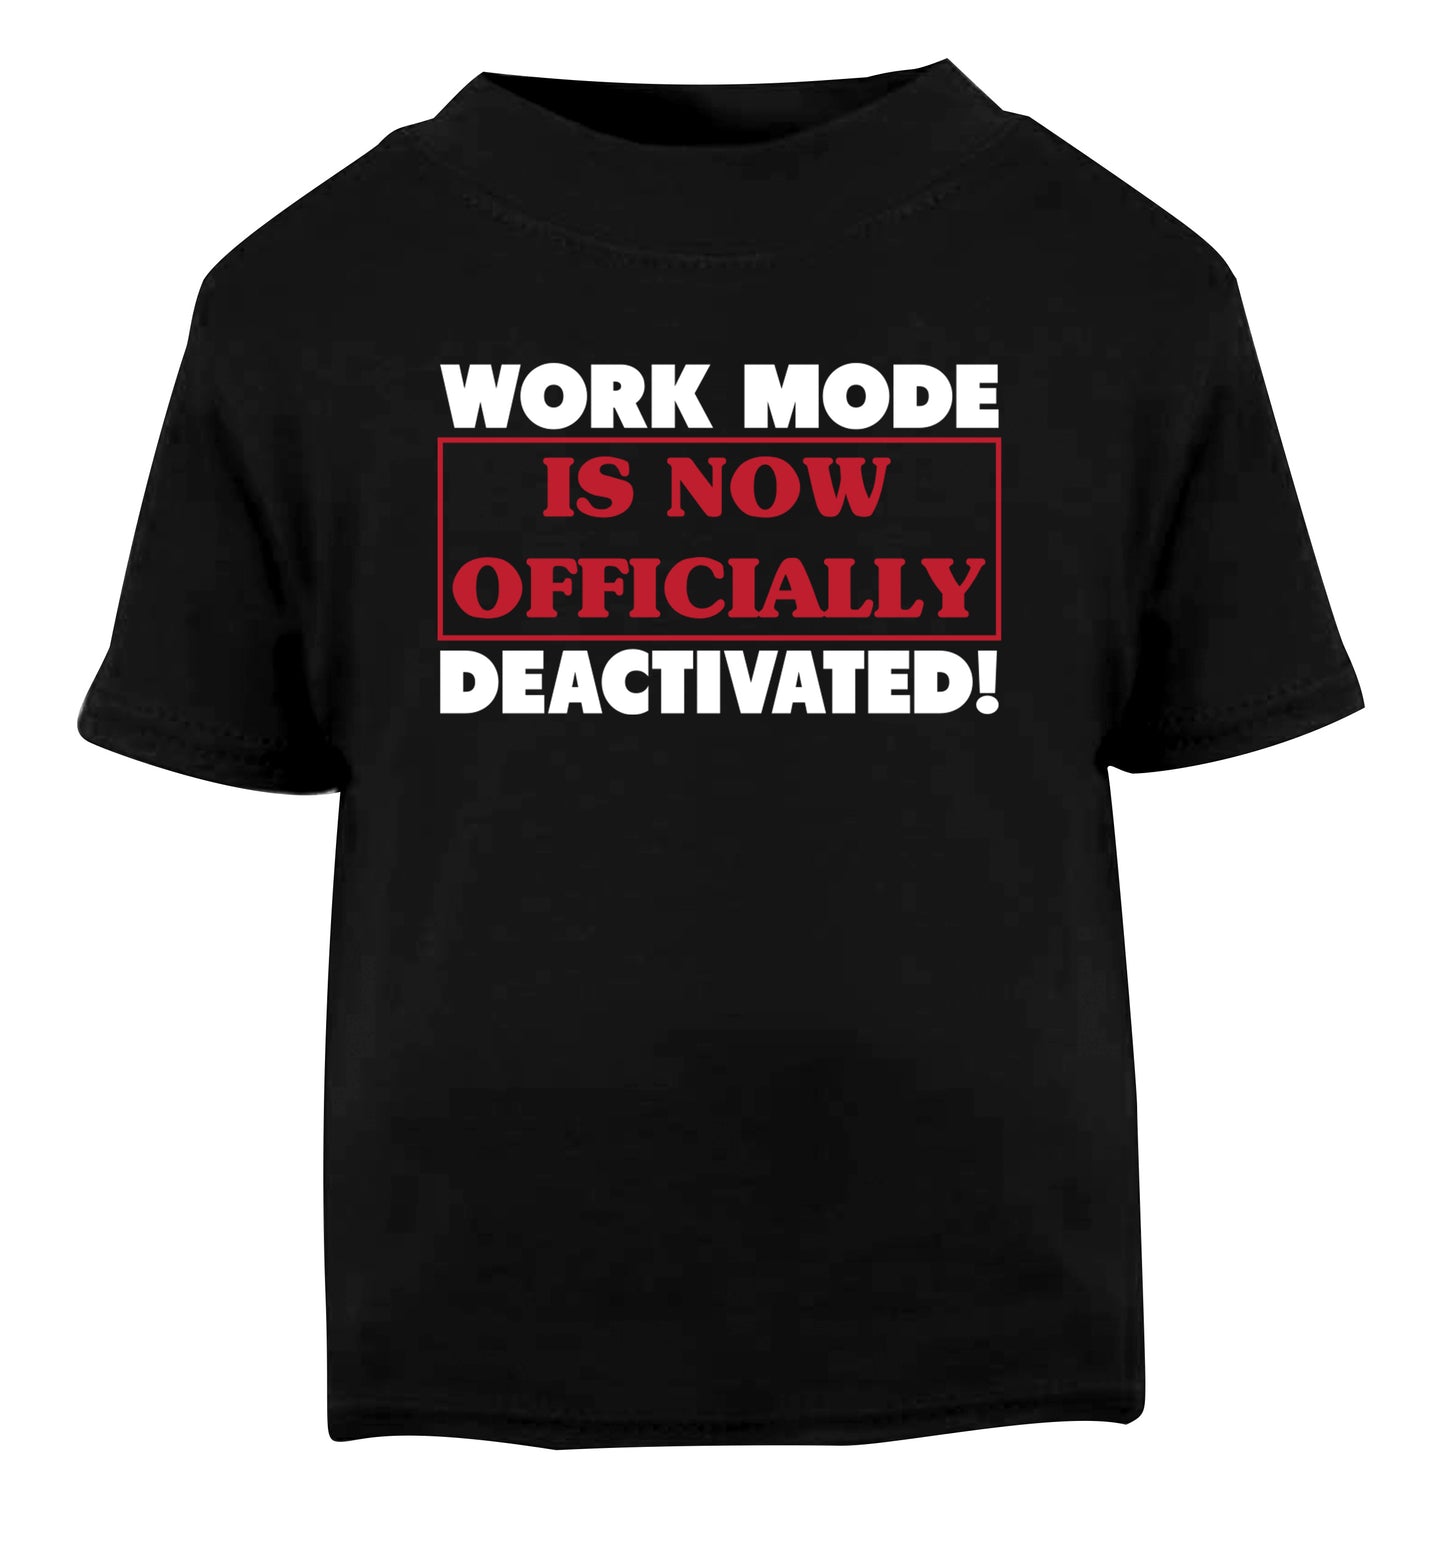 Work mode is now officially deactivated Black Baby Toddler Tshirt 2 years